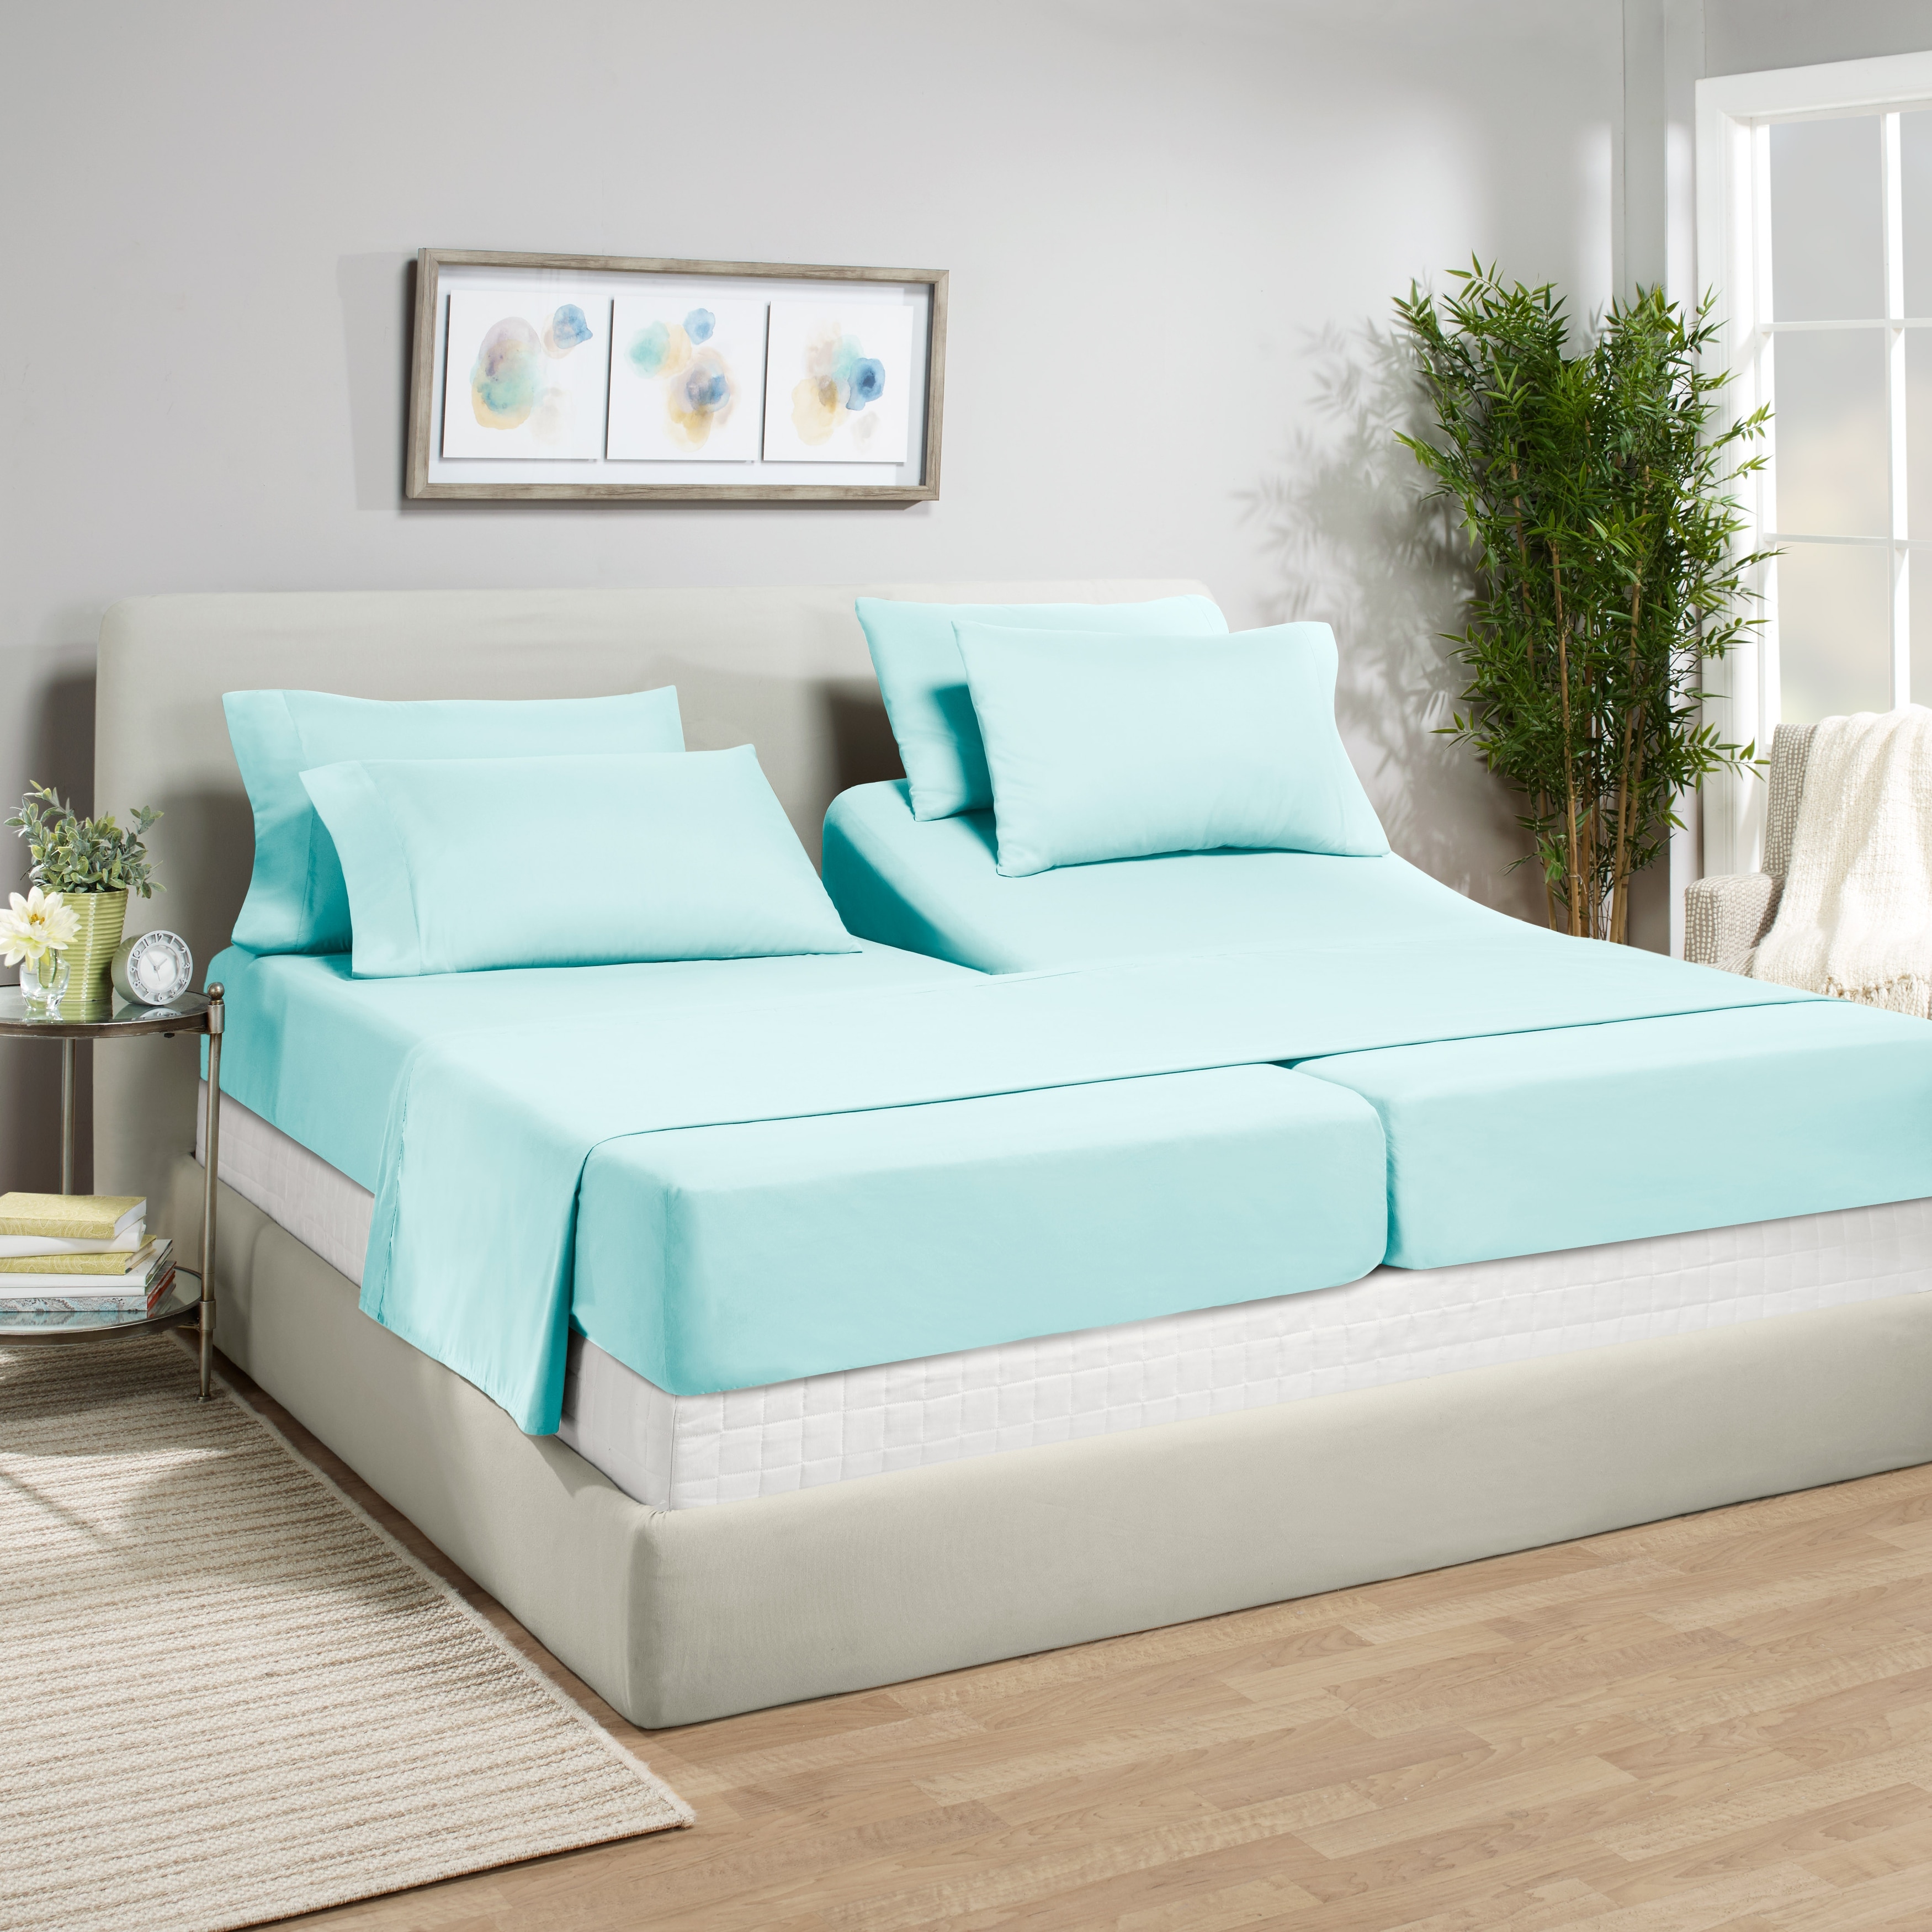 https://ak1.ostkcdn.com/images/products/is/images/direct/c3fb7ec64b5352b238e2f28510b327e3ba8f3a85/Empyrean-Bedding-18%22-21%22-Extra-Deep-Pocket-Sheets-Set---Ultra-Soft-Luxury-Bed-Sheet-Set.jpg